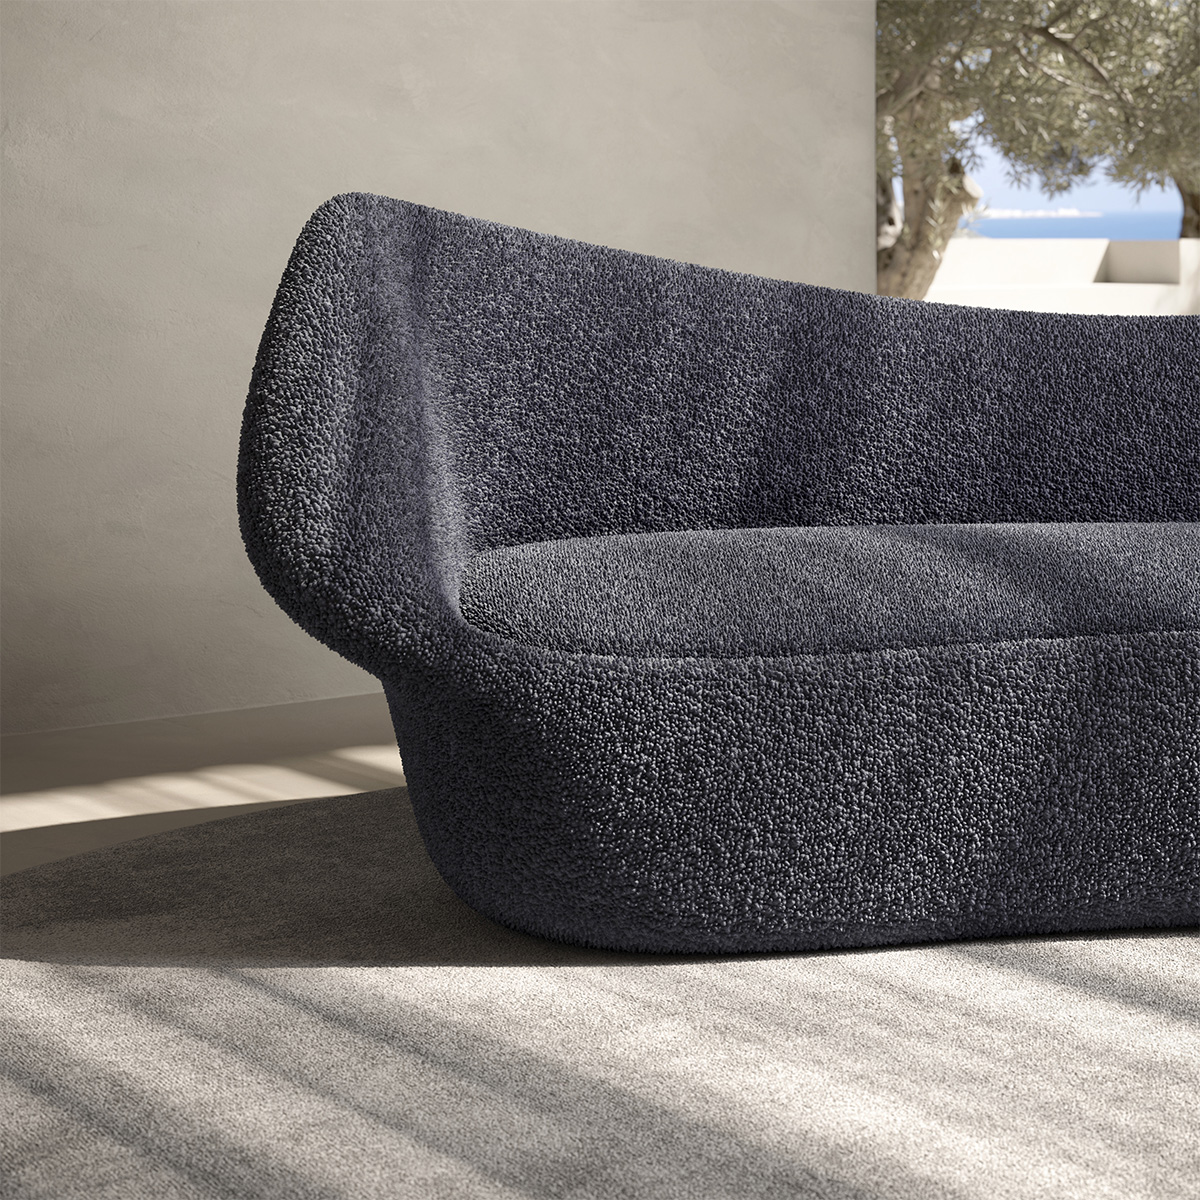 Natuzzi editorial - Simple as the flow of water